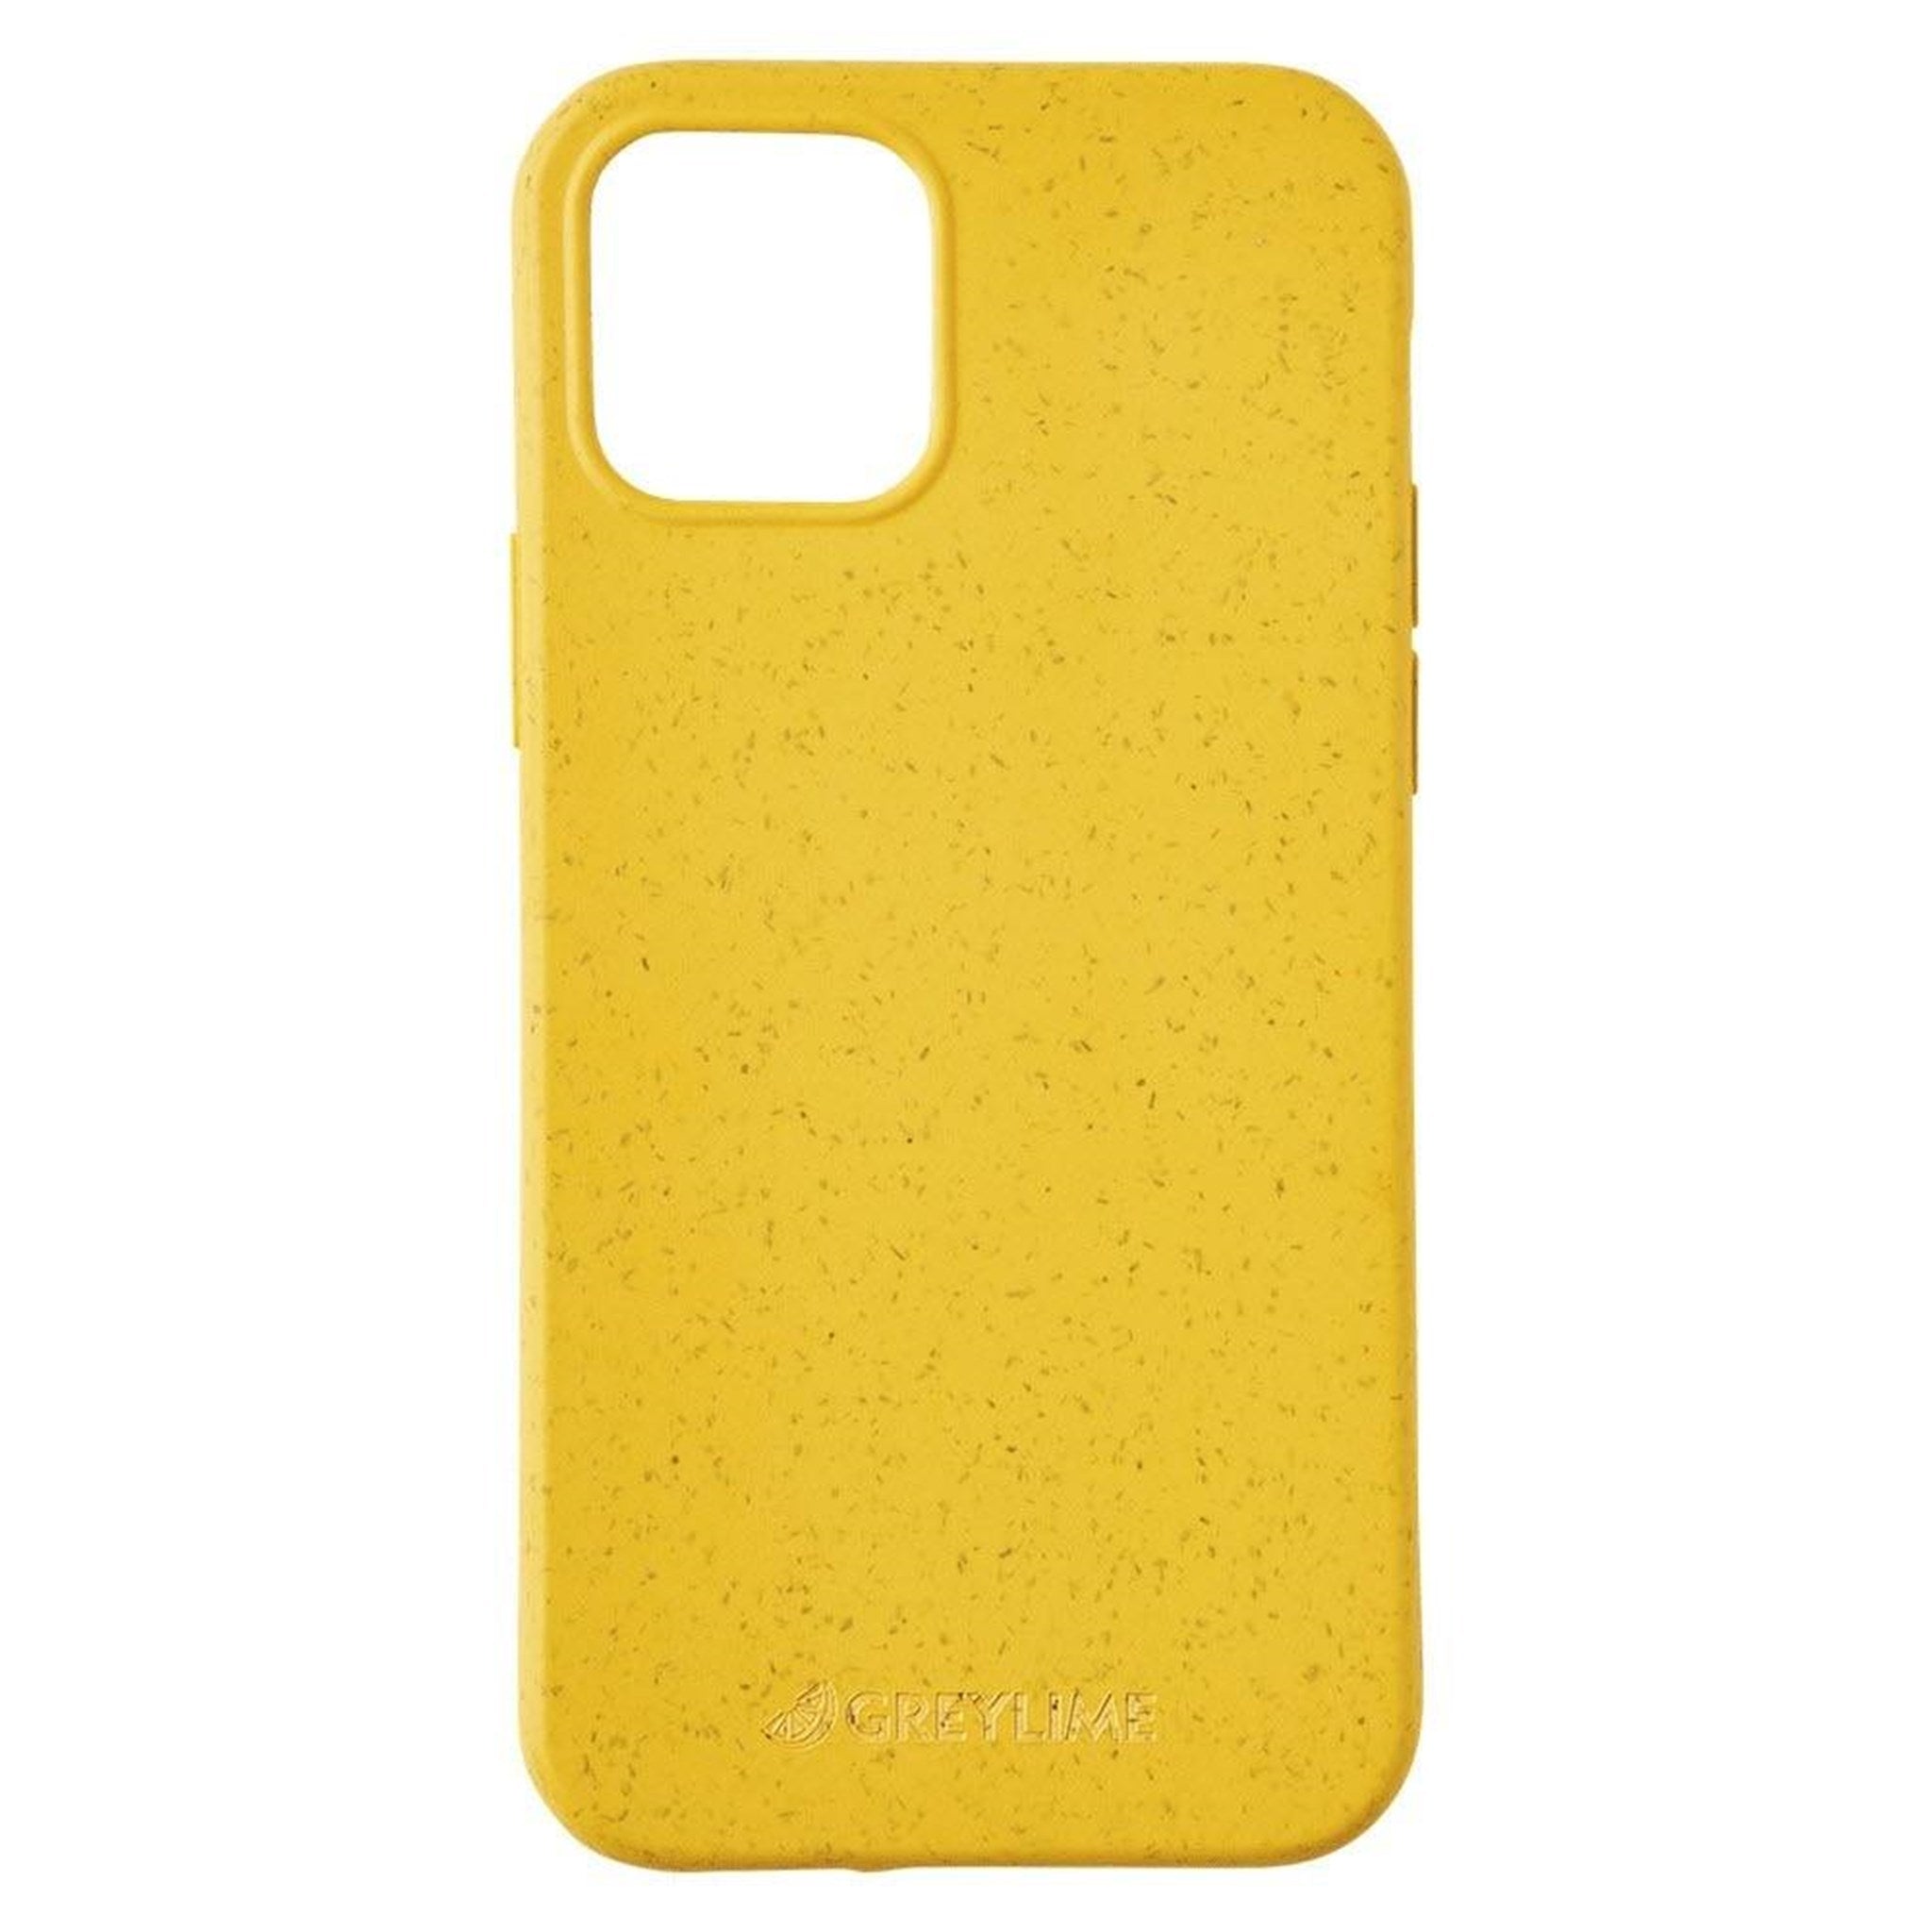 GreyLime-iPhone-12-12-Pro-Biodegdrable-Cover-Yellow-COIP12M06-V3.jpg